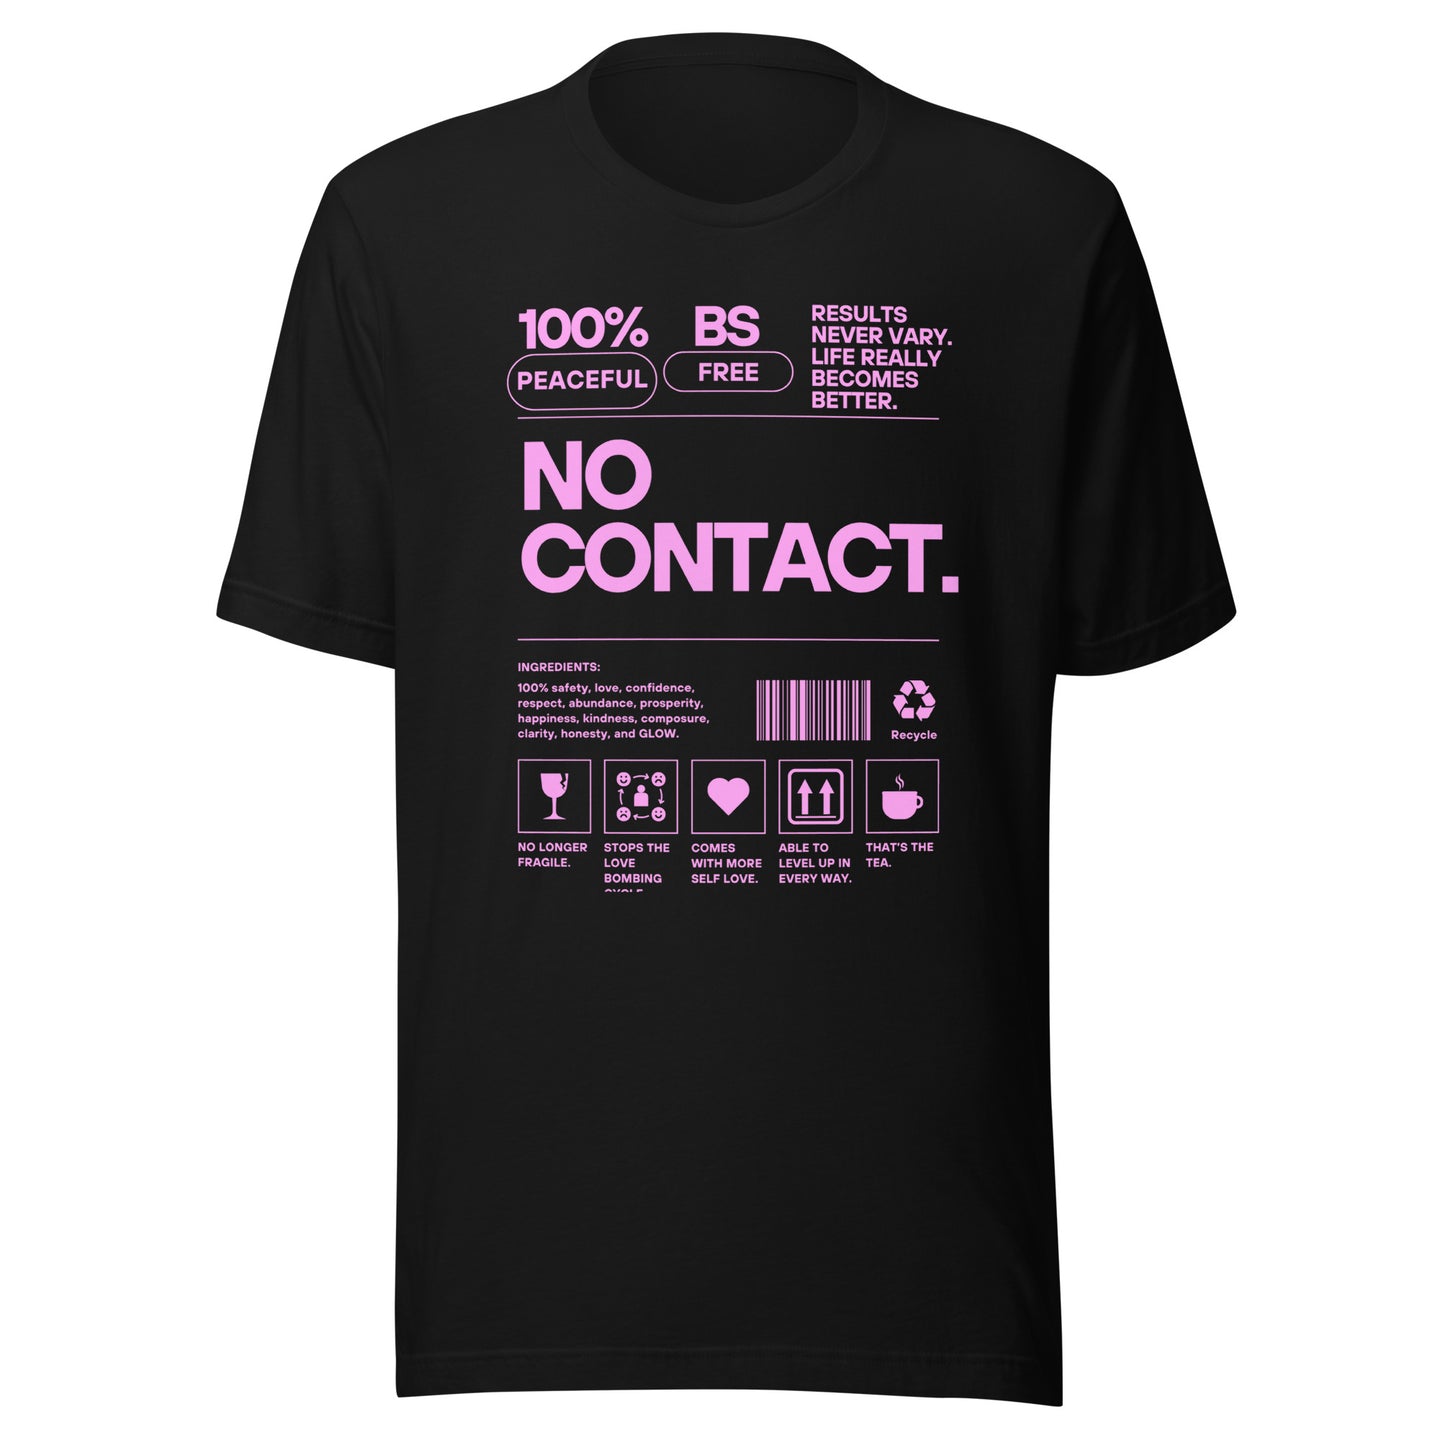 The NO CONTACT Product Tee.